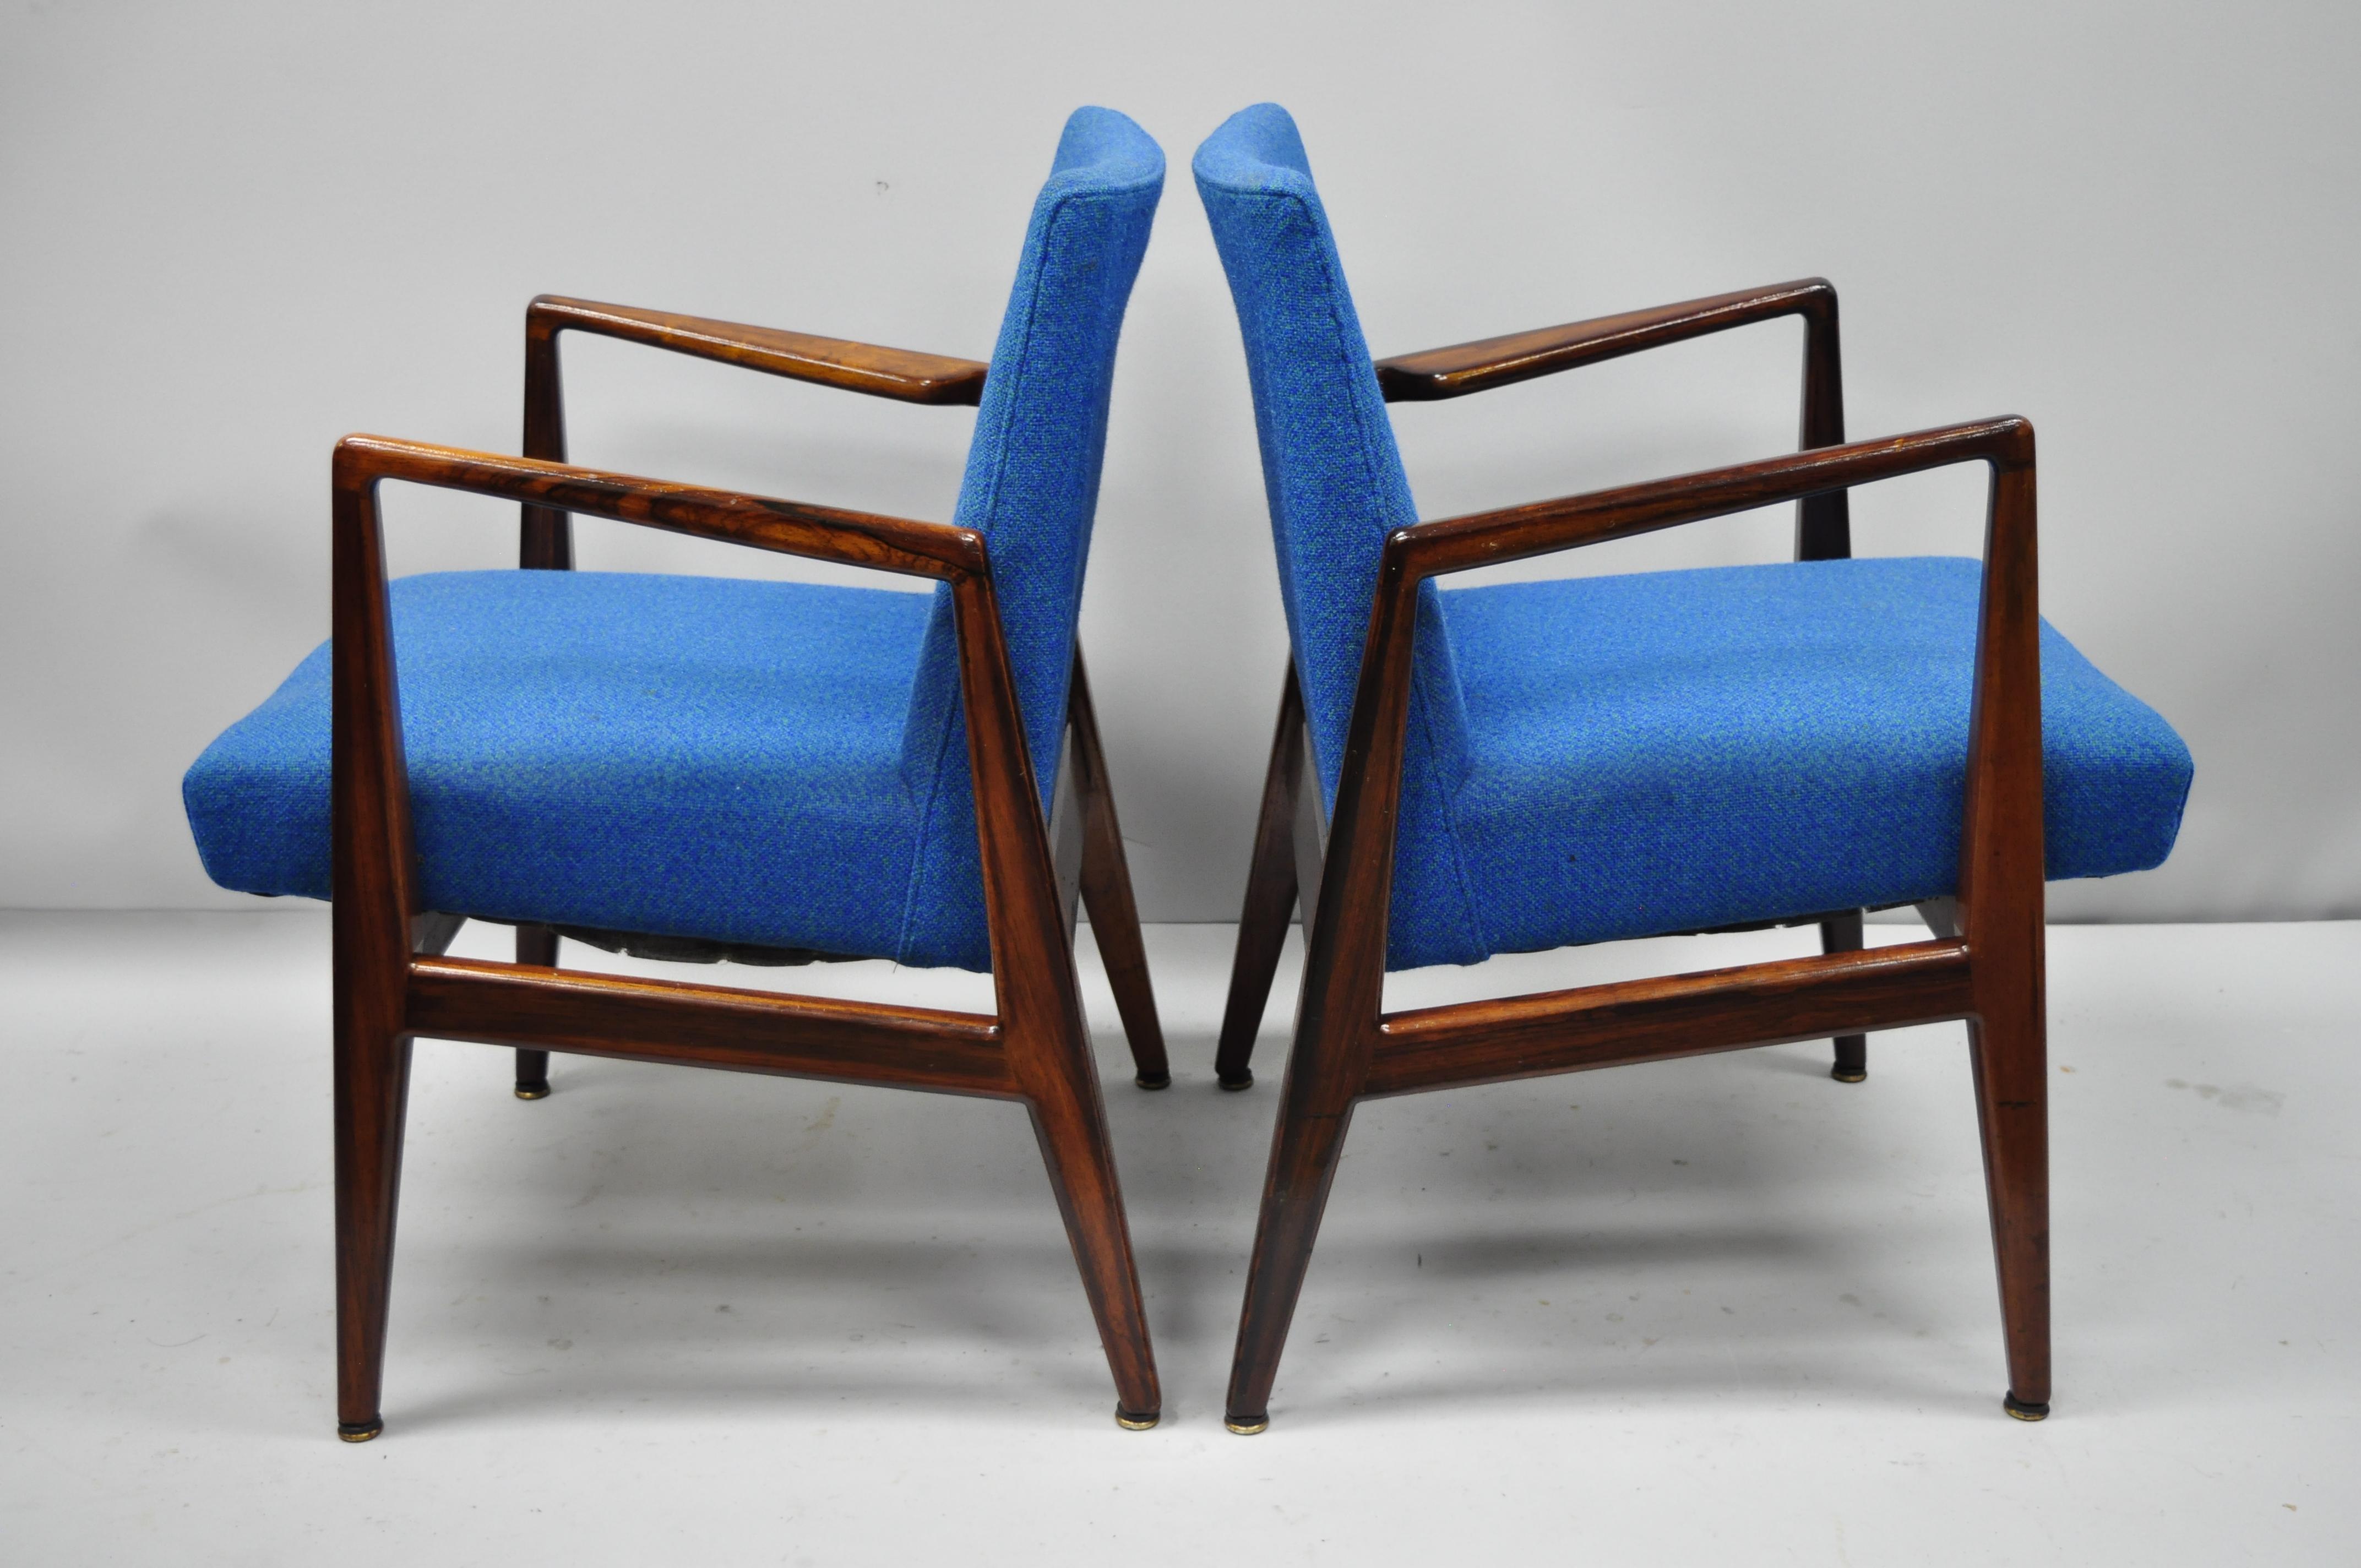 Pair of Jens Risom Rosewood Mid-Century Modern blue fabric armchairs. Item features solid rosewood frame, beautiful wood grain, clean modernist lines, and sleek sculptural form, circa 1950. Measurements: 31